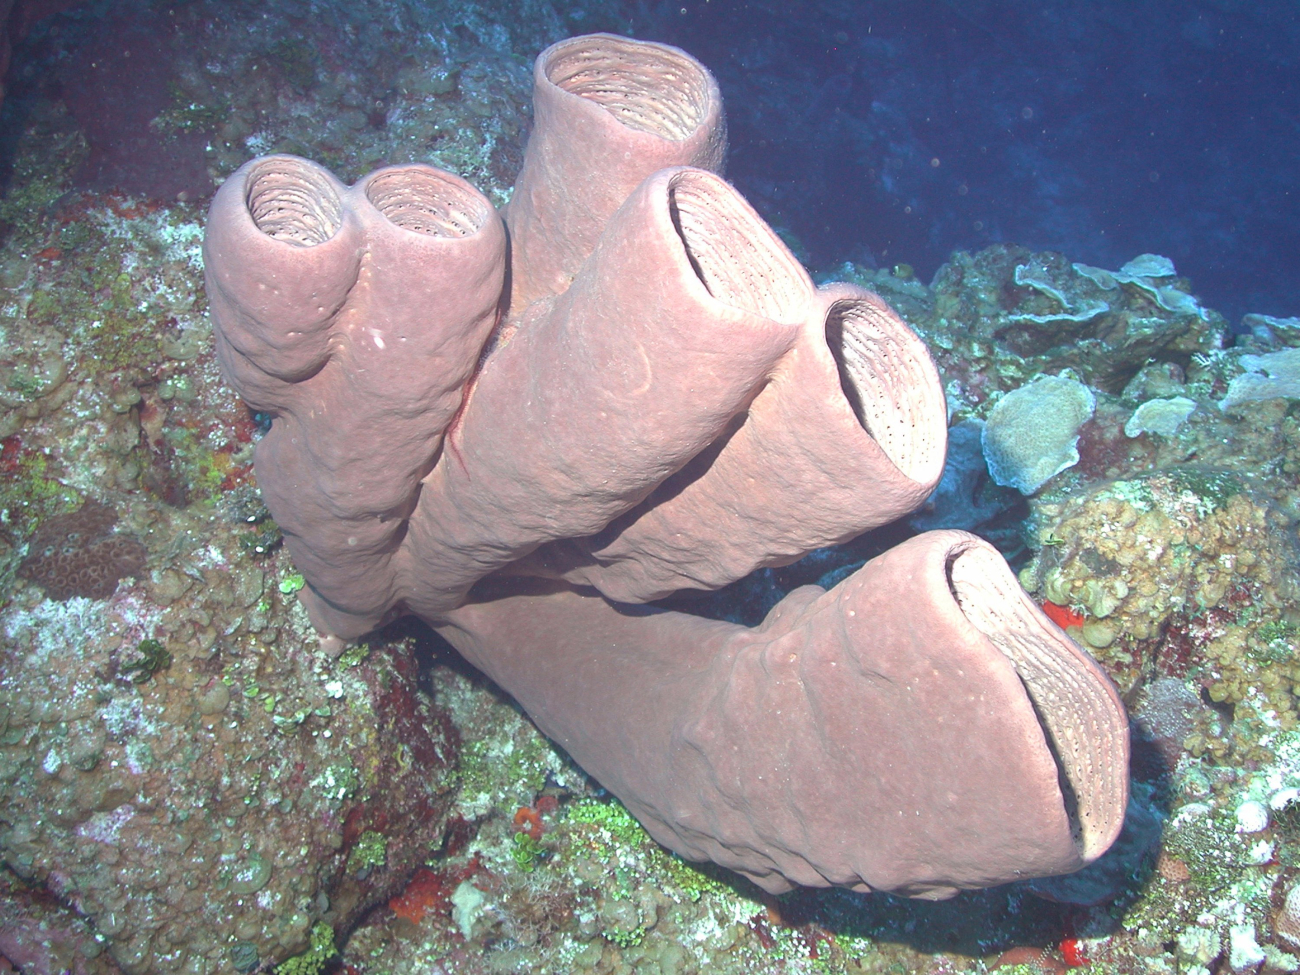 Agelas conifera is a common sponge of the Caribbean over a broad depth gradient